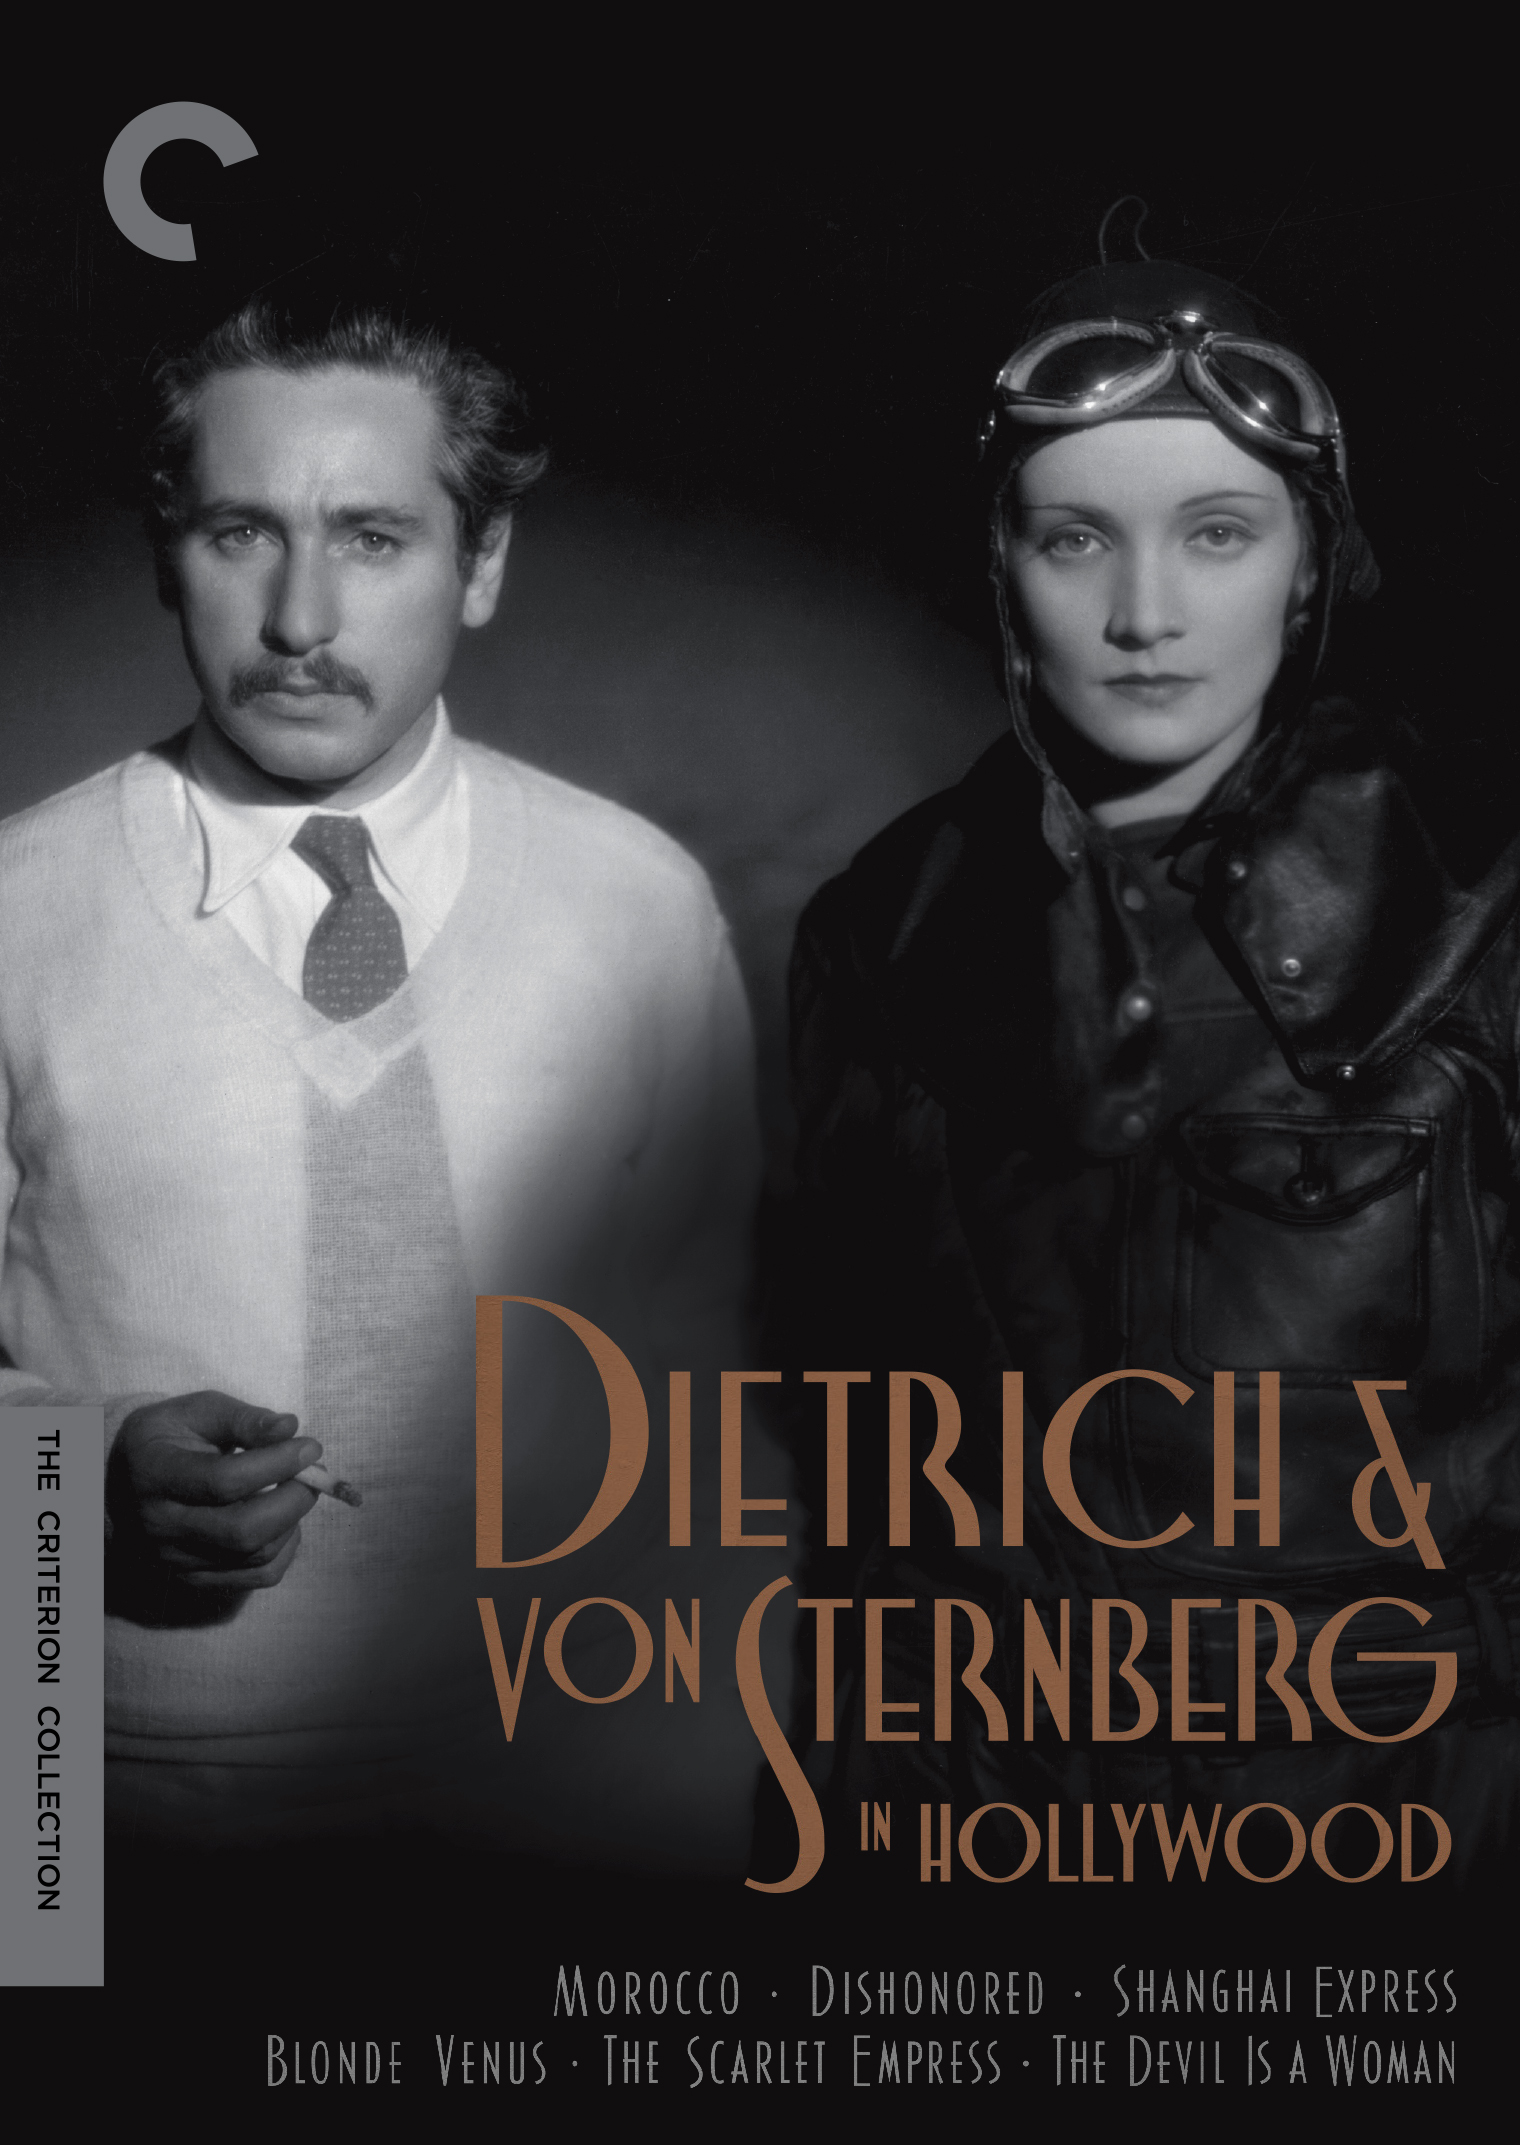 Dietrich & von Sternberg in Hollywood: Morocco; Dishonored; Shanghai Express; Blonde Venus; The Scarlet Empress; The Devil Is a Woman